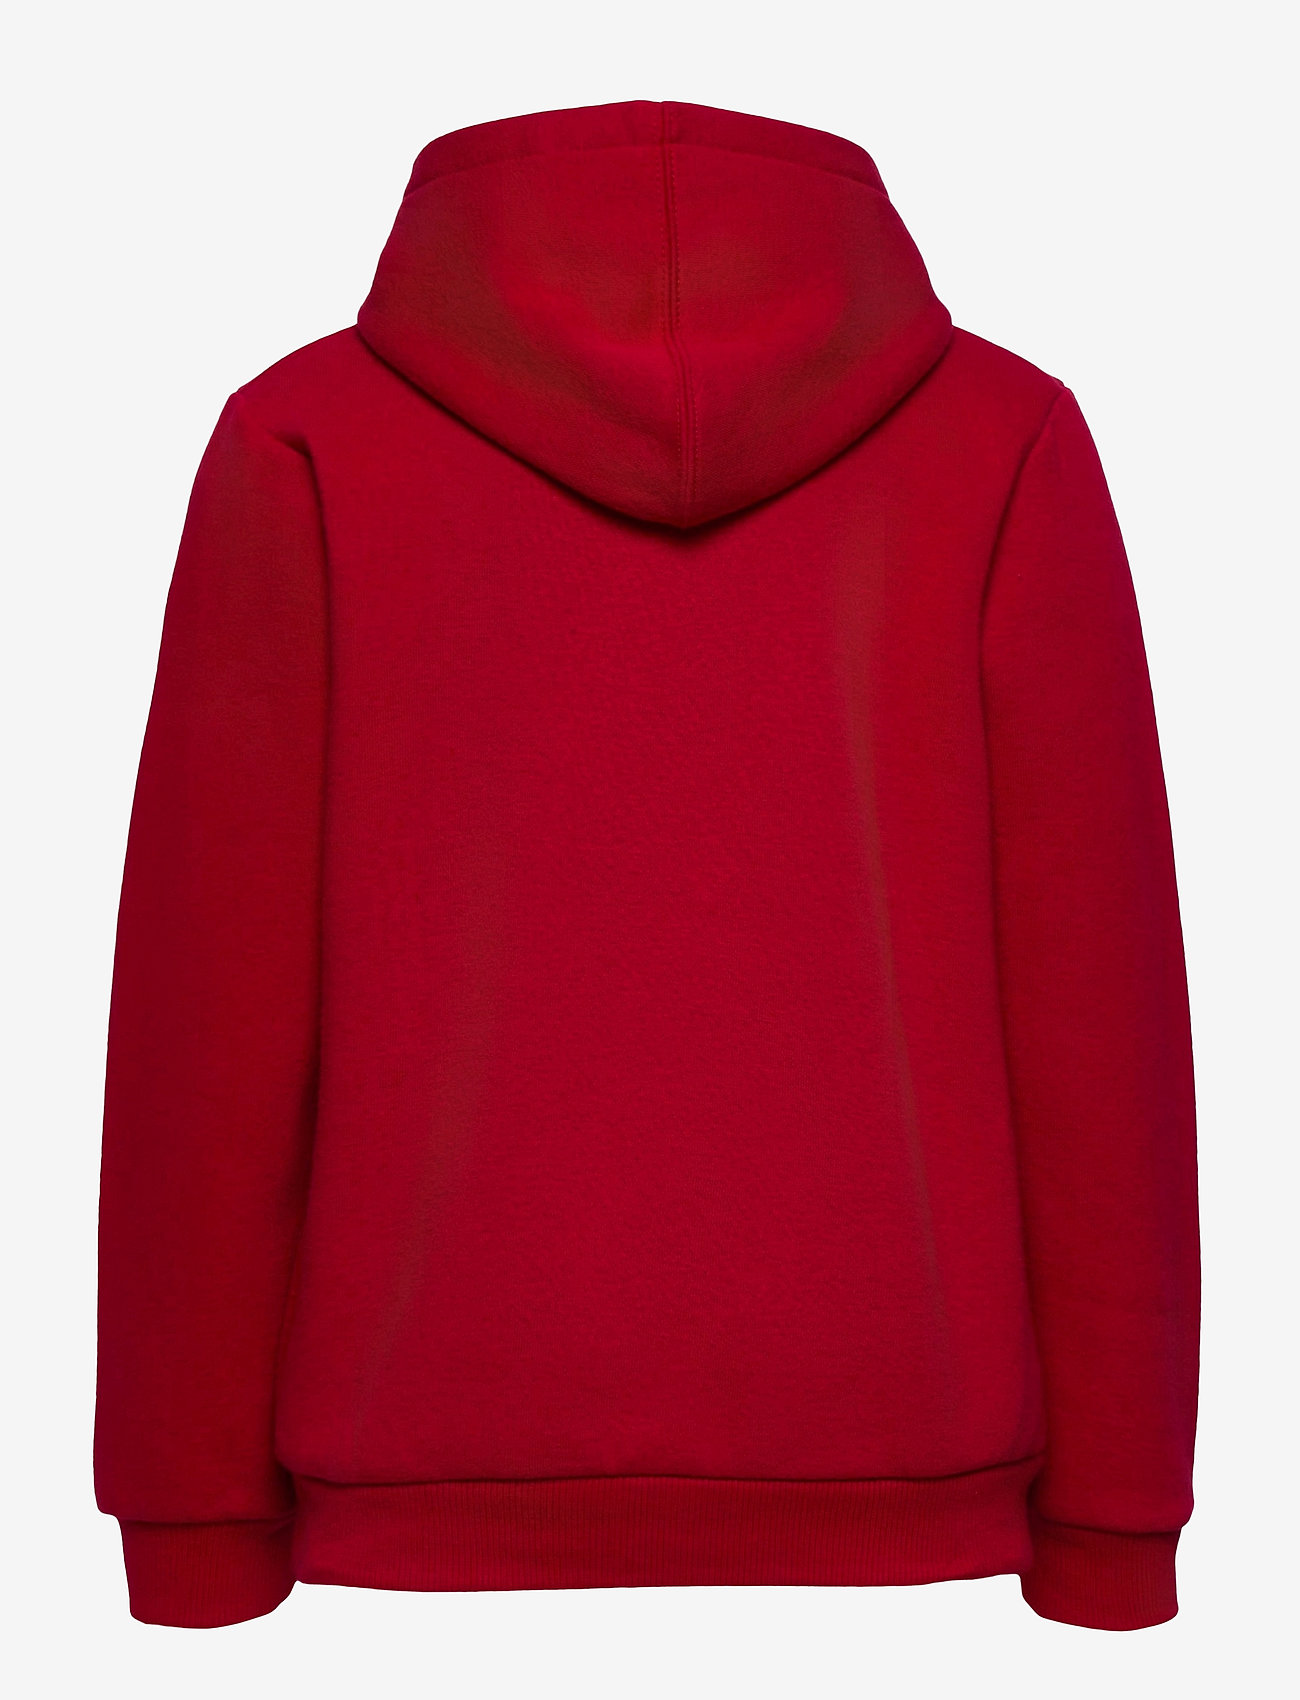 Levi's - Levi's® Batwing Screenprint Hooded Pullover - hoodies - levis red/white - 1